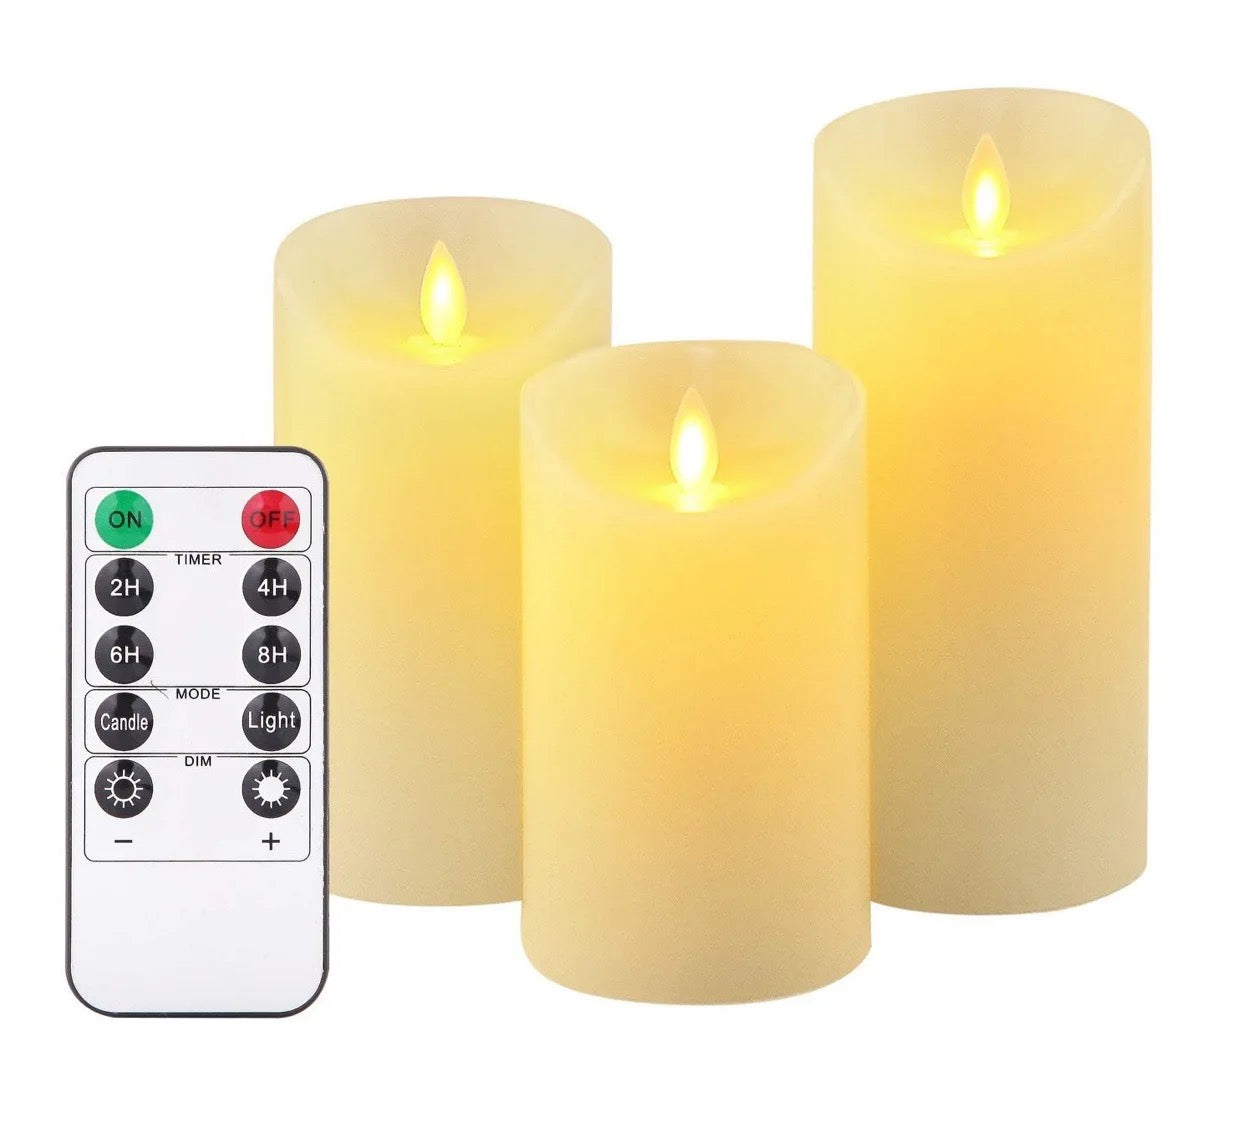 Showcasing 3 Flameless LED Candles lit up in 3 different sizes along with it's remote control 